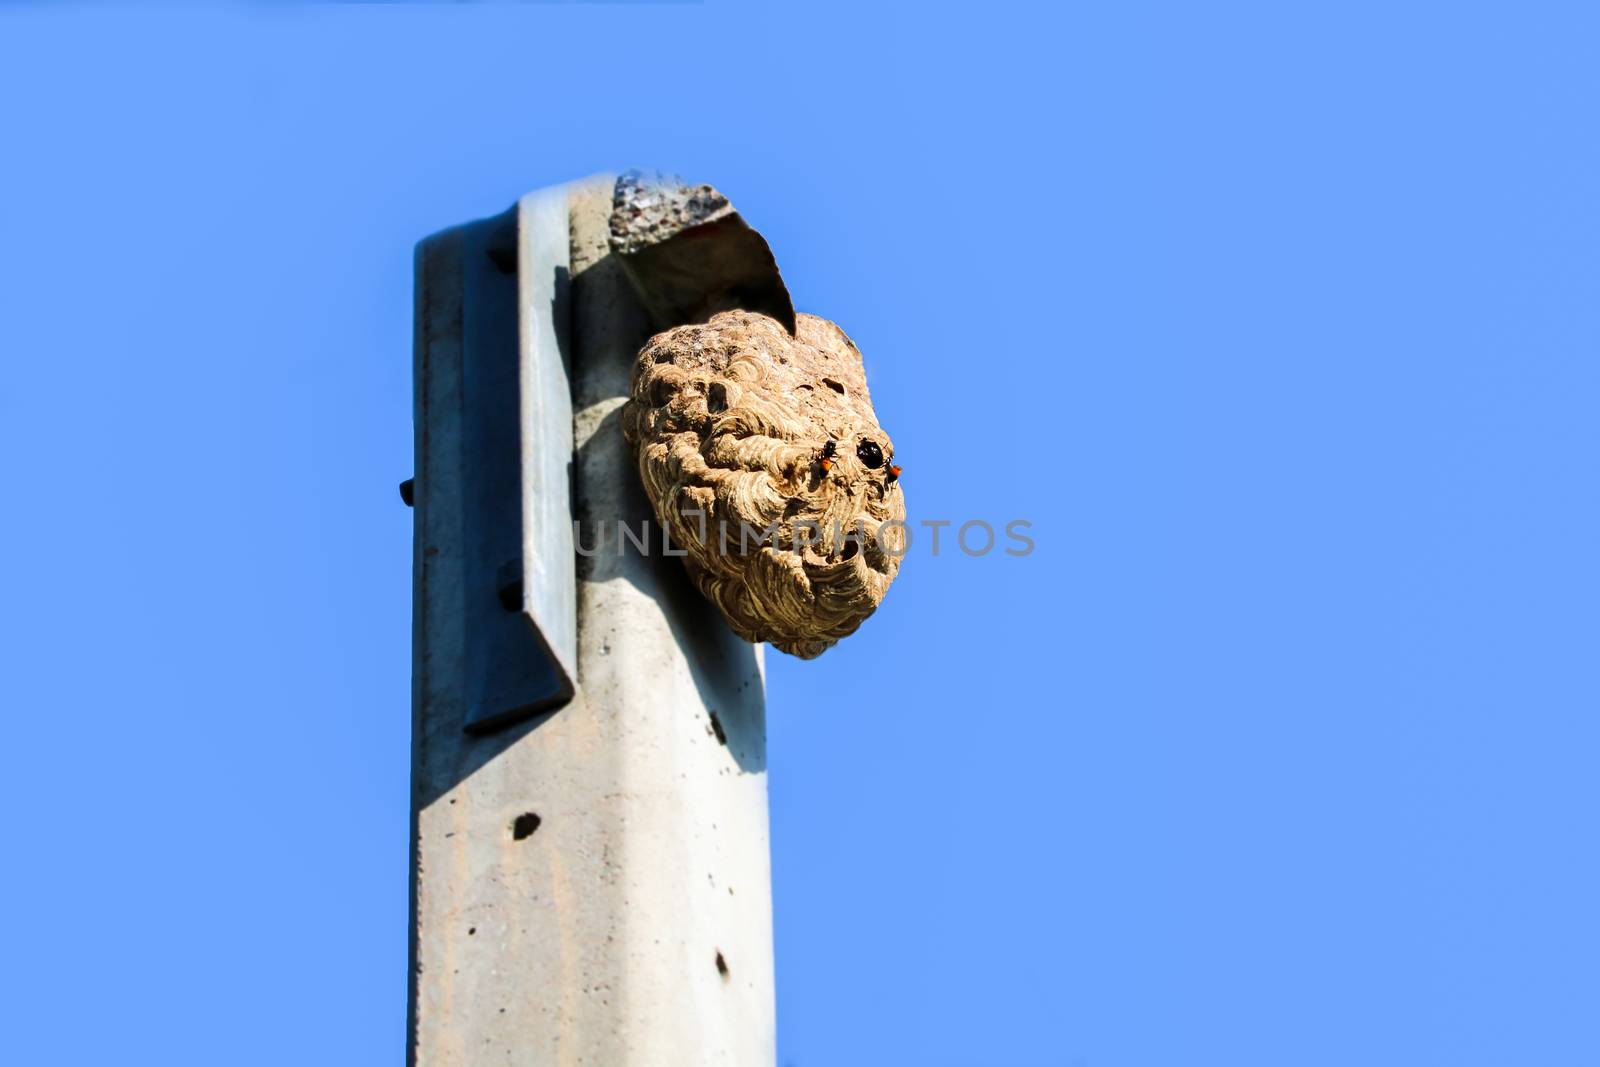 Wasps nest on top of the electric pole to avoid interference fro by Darkfox